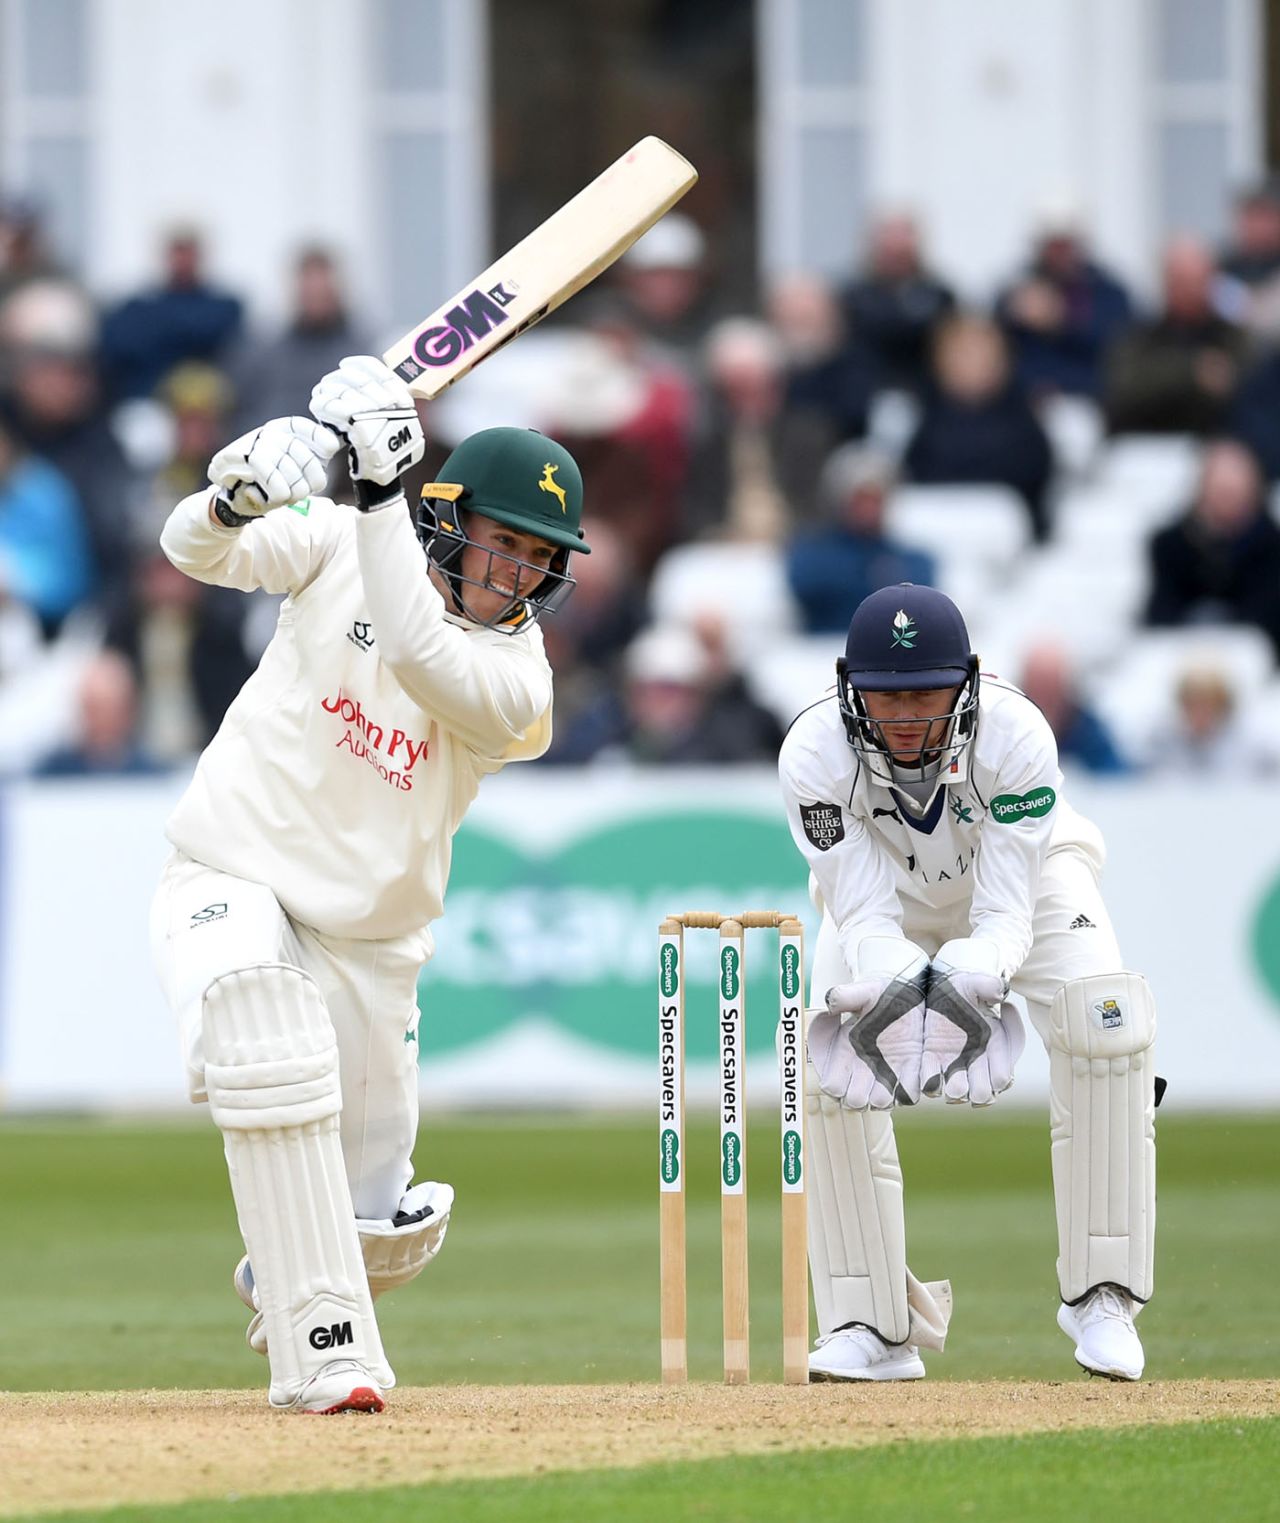 Ben Slater strokes one through the covers, Notts v Yorkshire, County Championship Division One, Trent Bridge, April 5, 2019